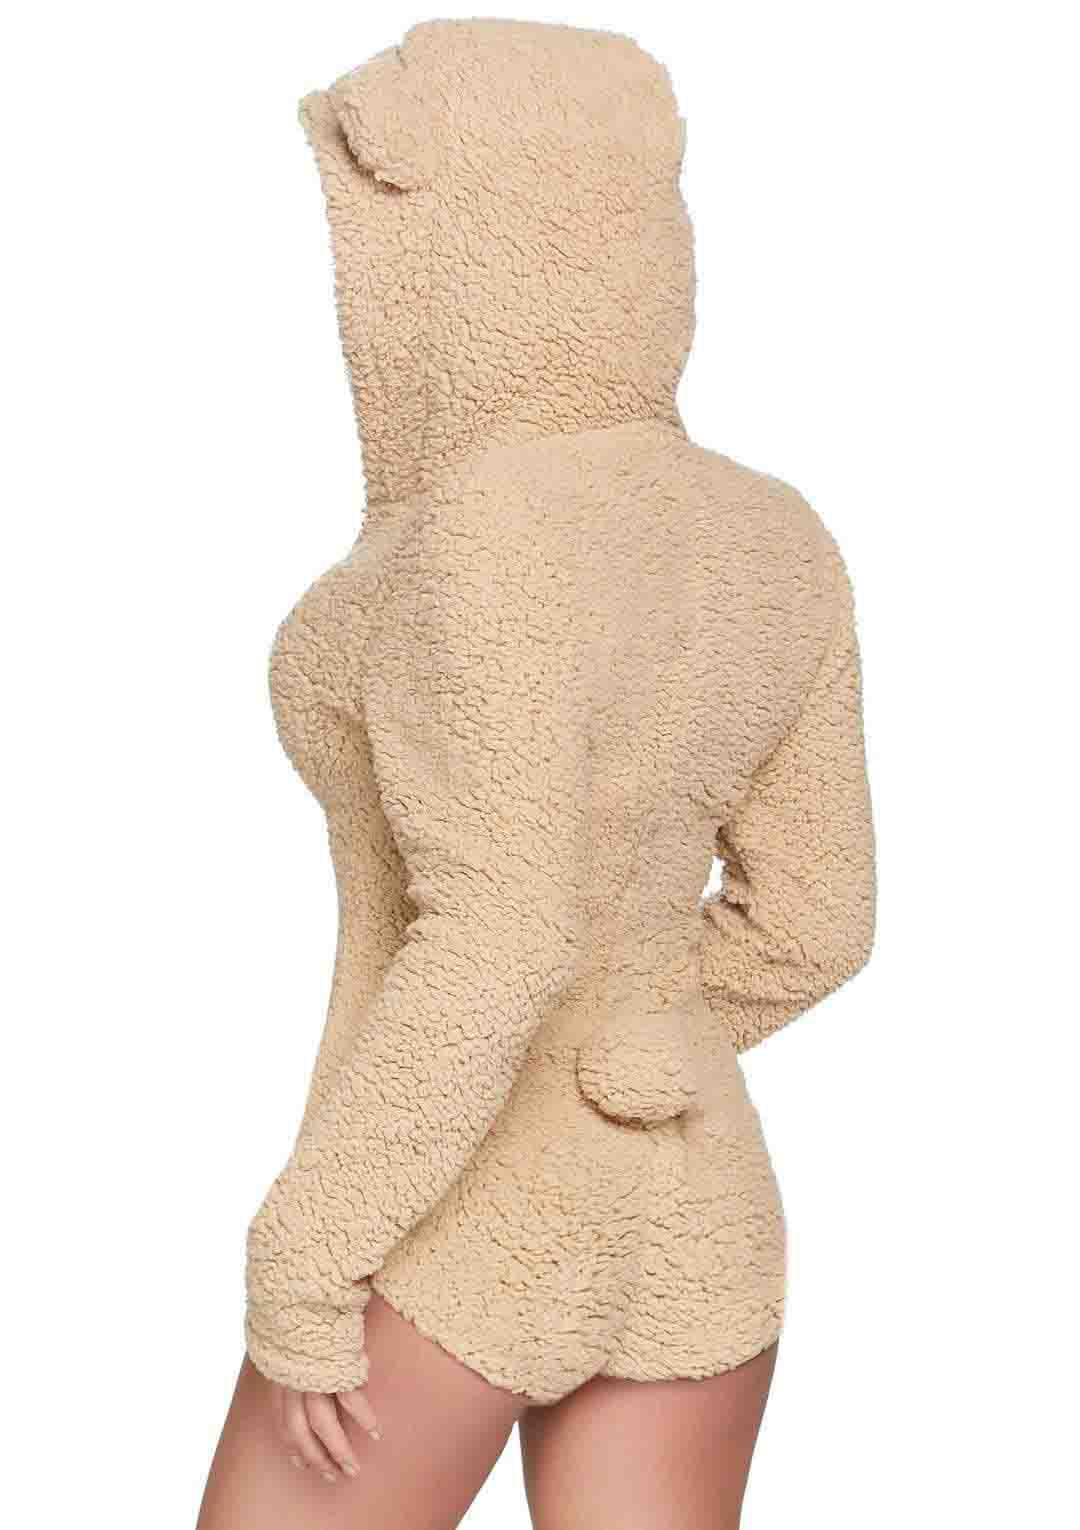 The back of the Cuddle Teddy Onesie.